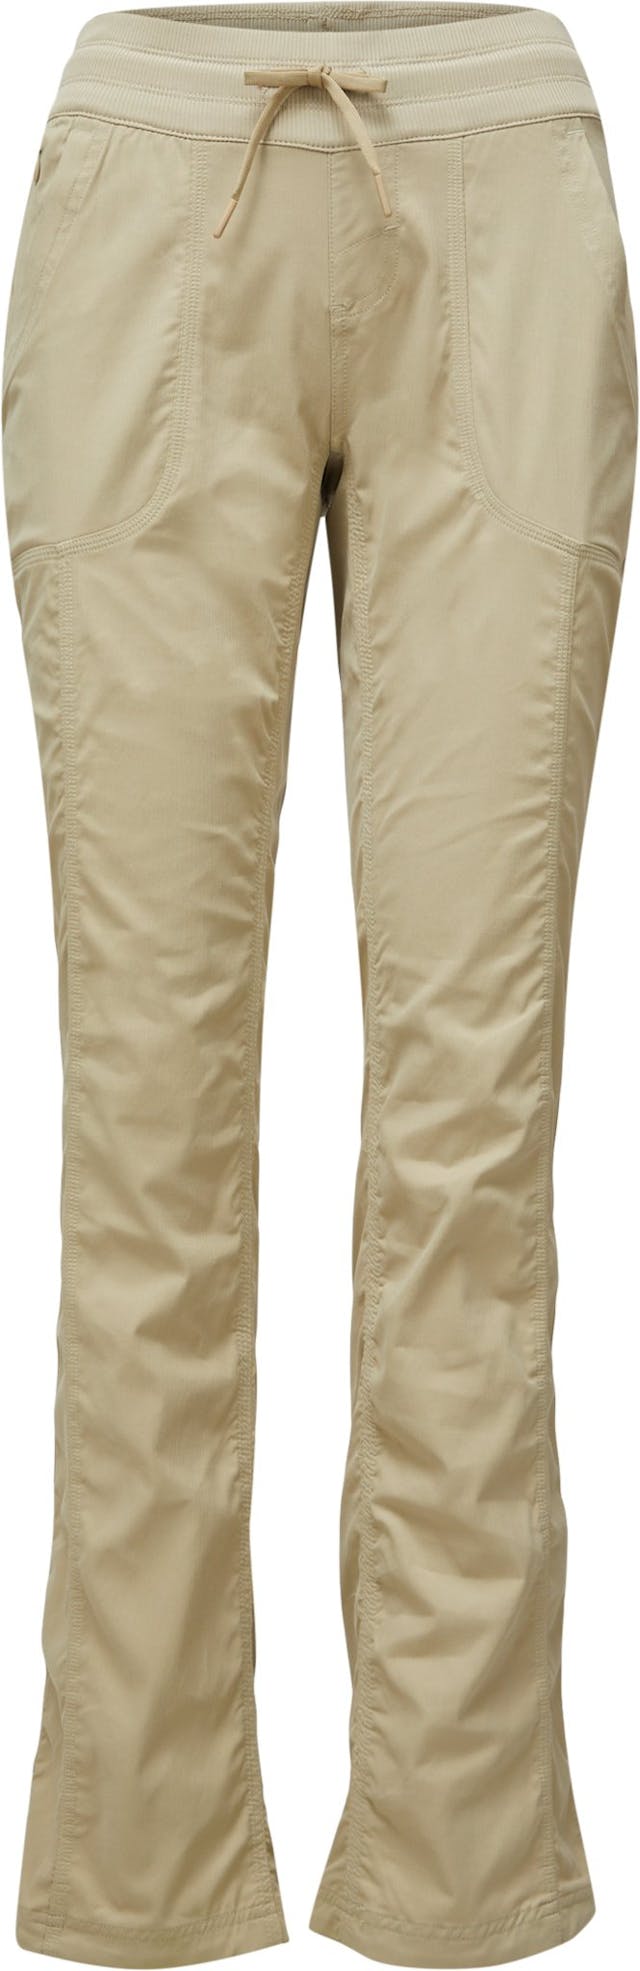 Product image for Aphrodite 2.0 Pant - Women’s